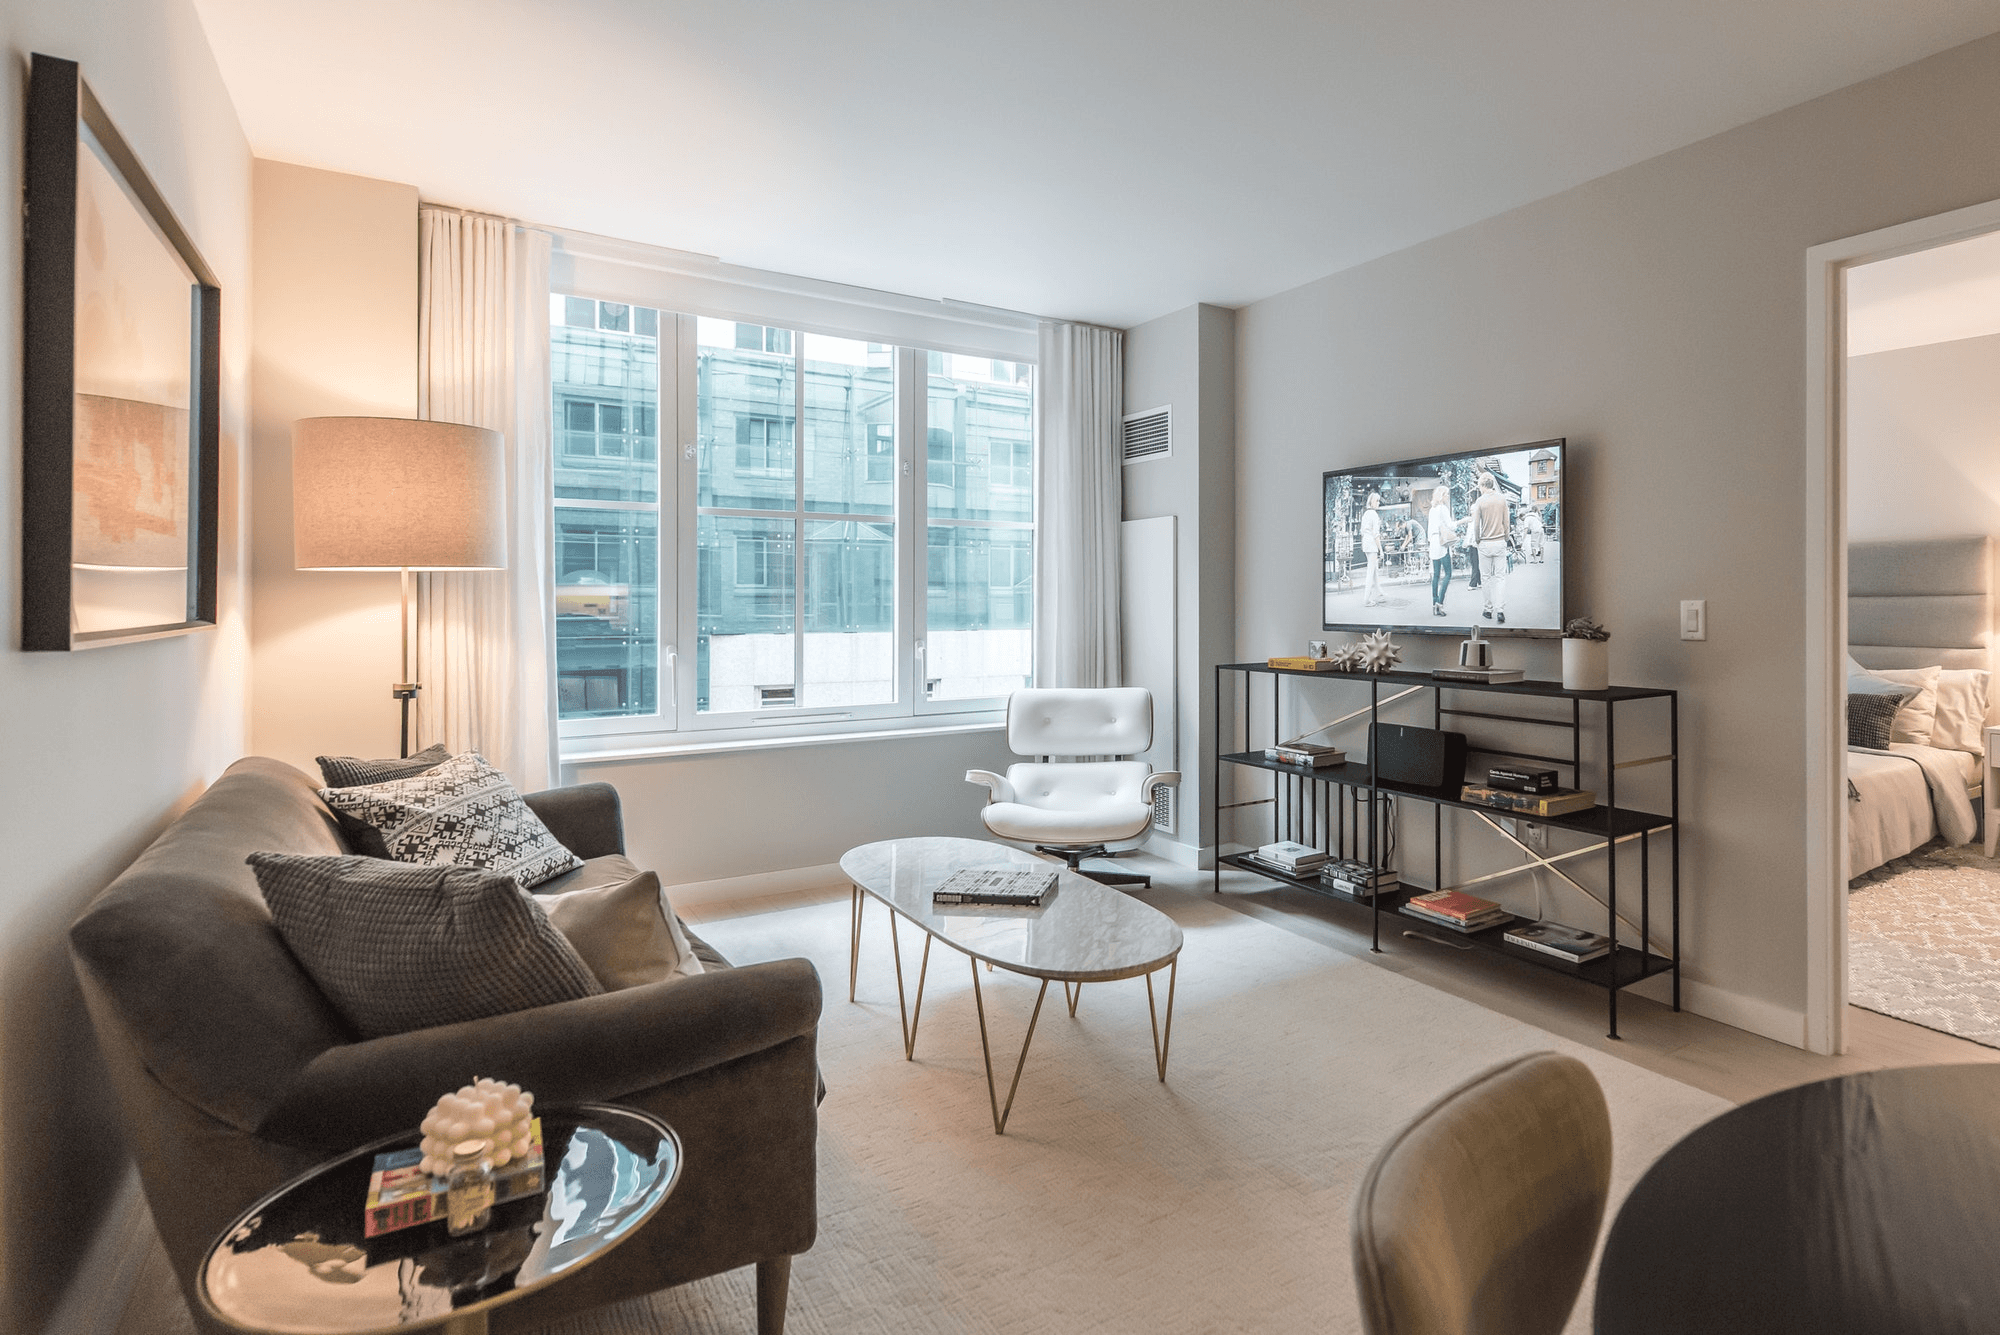 Magnificent 1 Bedroom 1 Bathroom in the heart of Hell's Kitchen (Midtown West). Full Service Luxury Building with Doorman/Gym/Playroom, etc. *NO FEE*